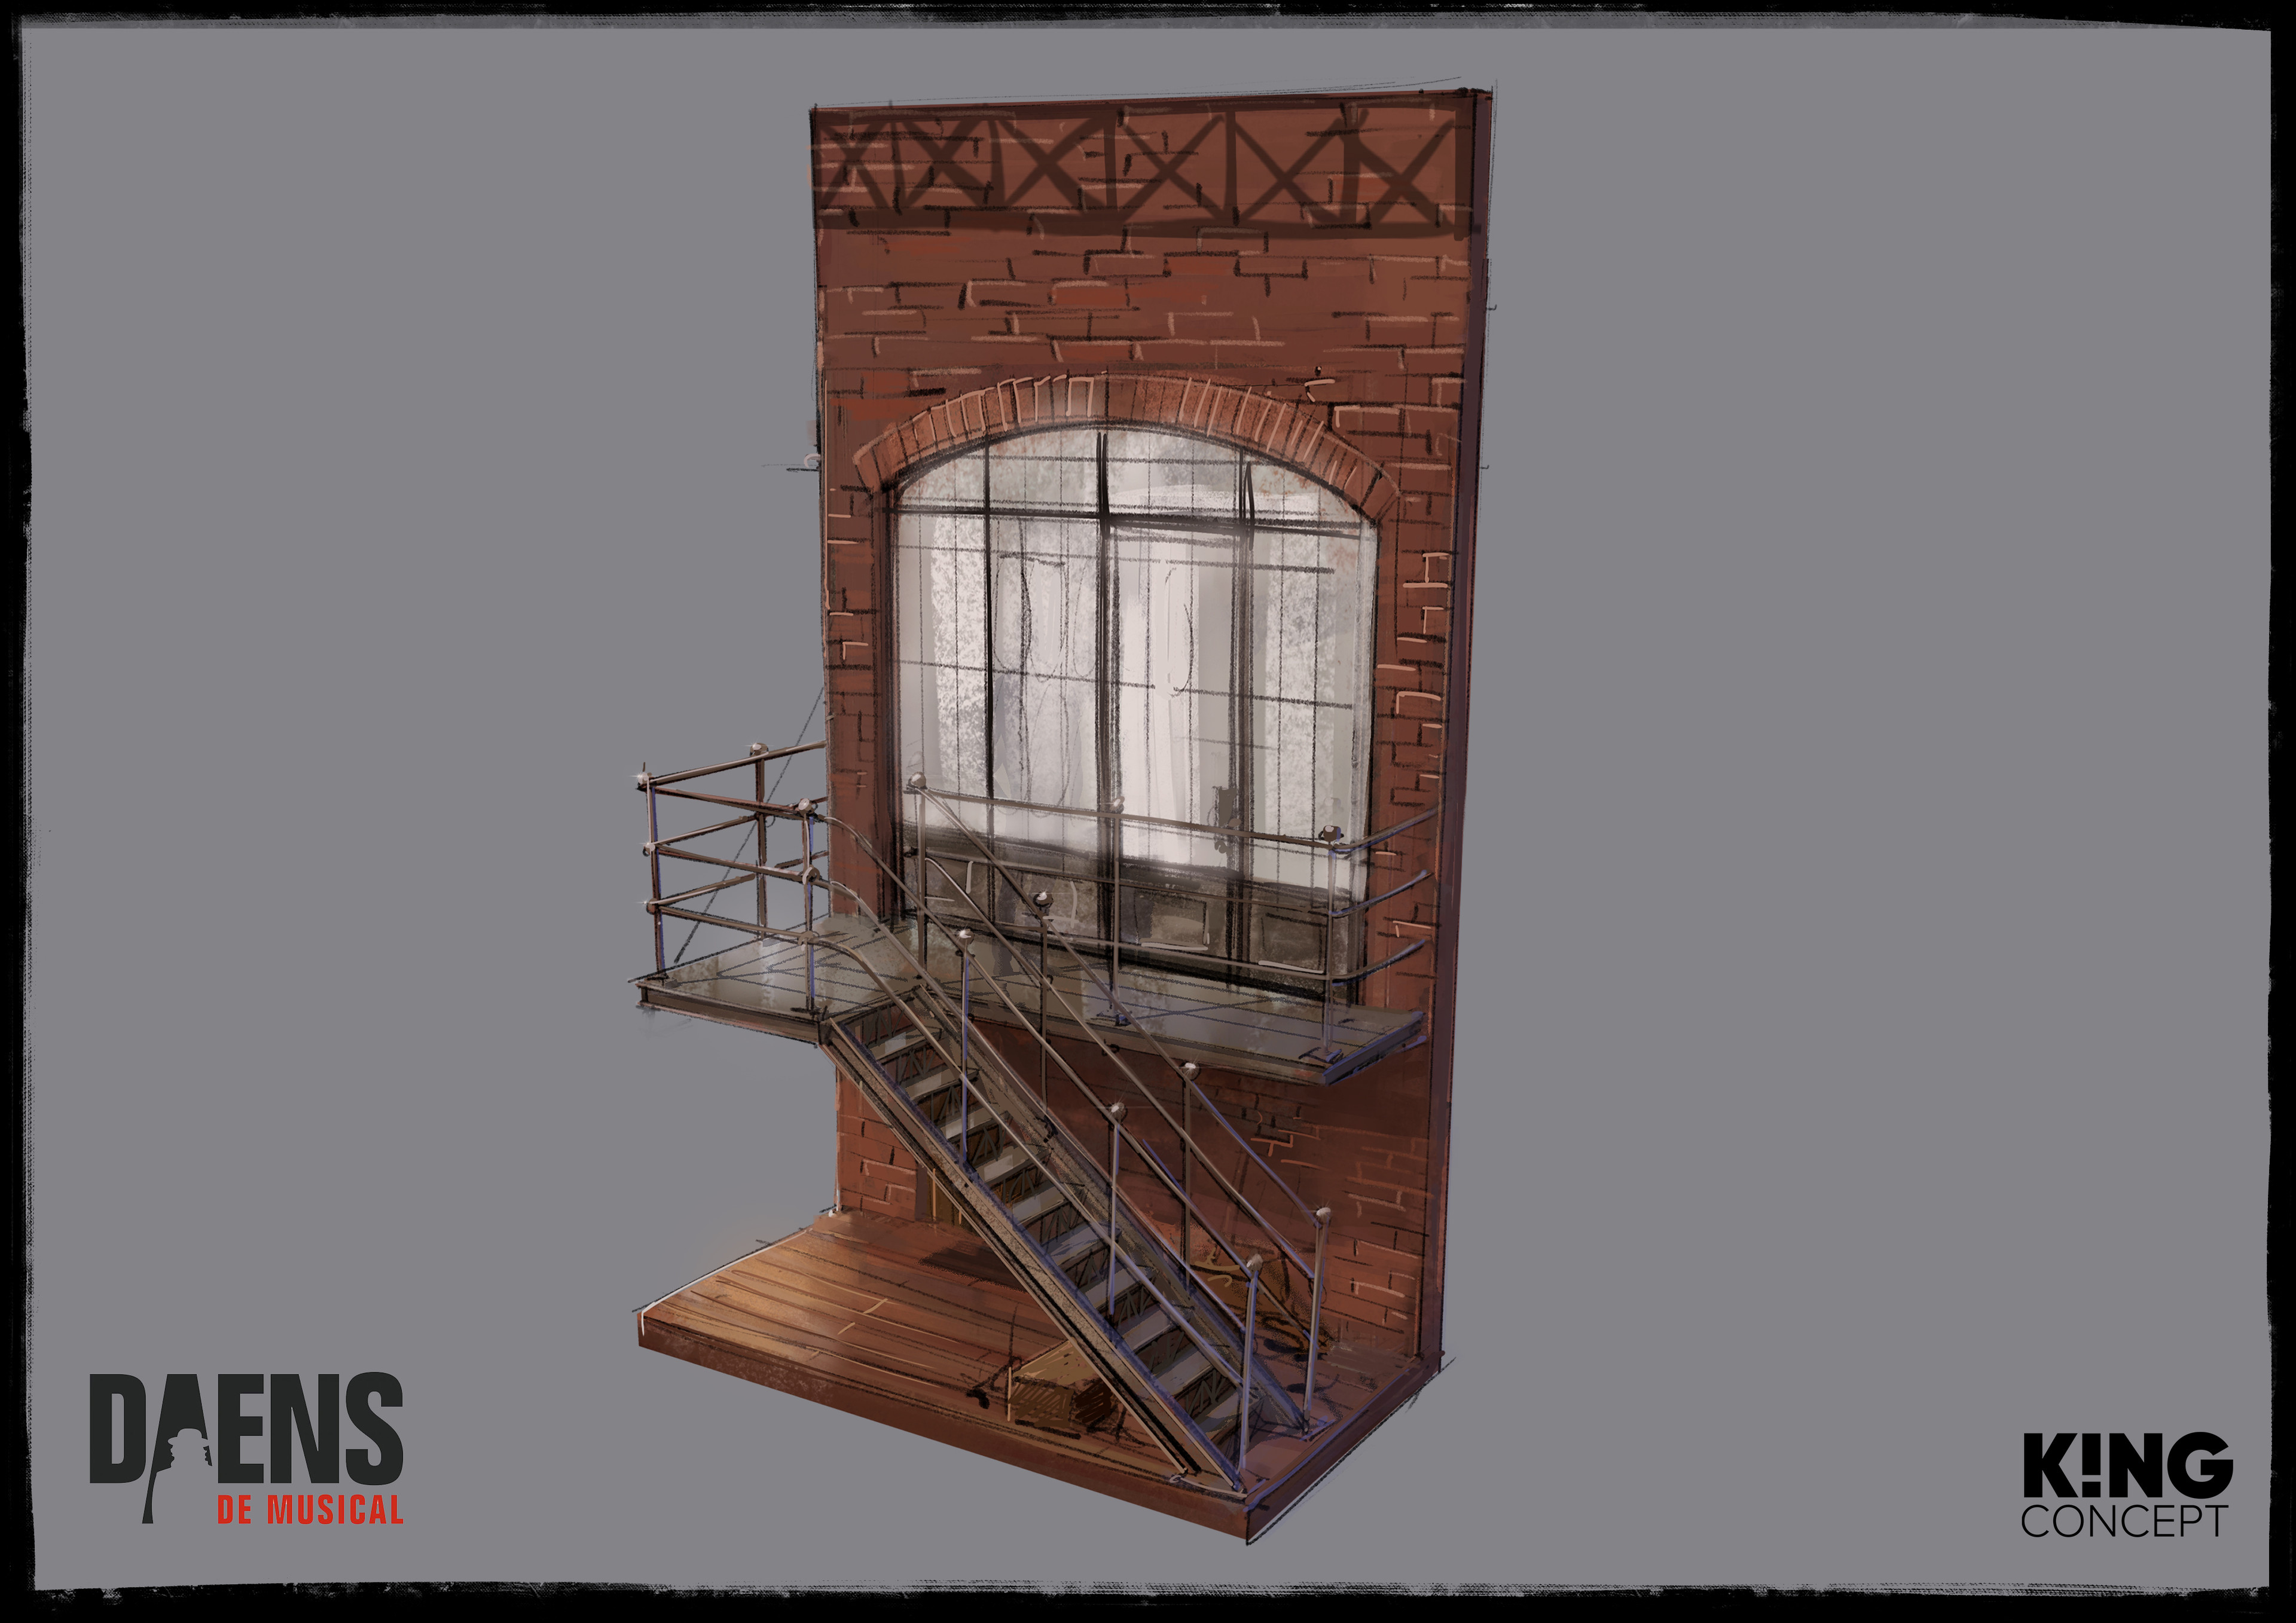 Concept for the factory office. This set piece has two sides, the other side is the pulpit used in the church scene.